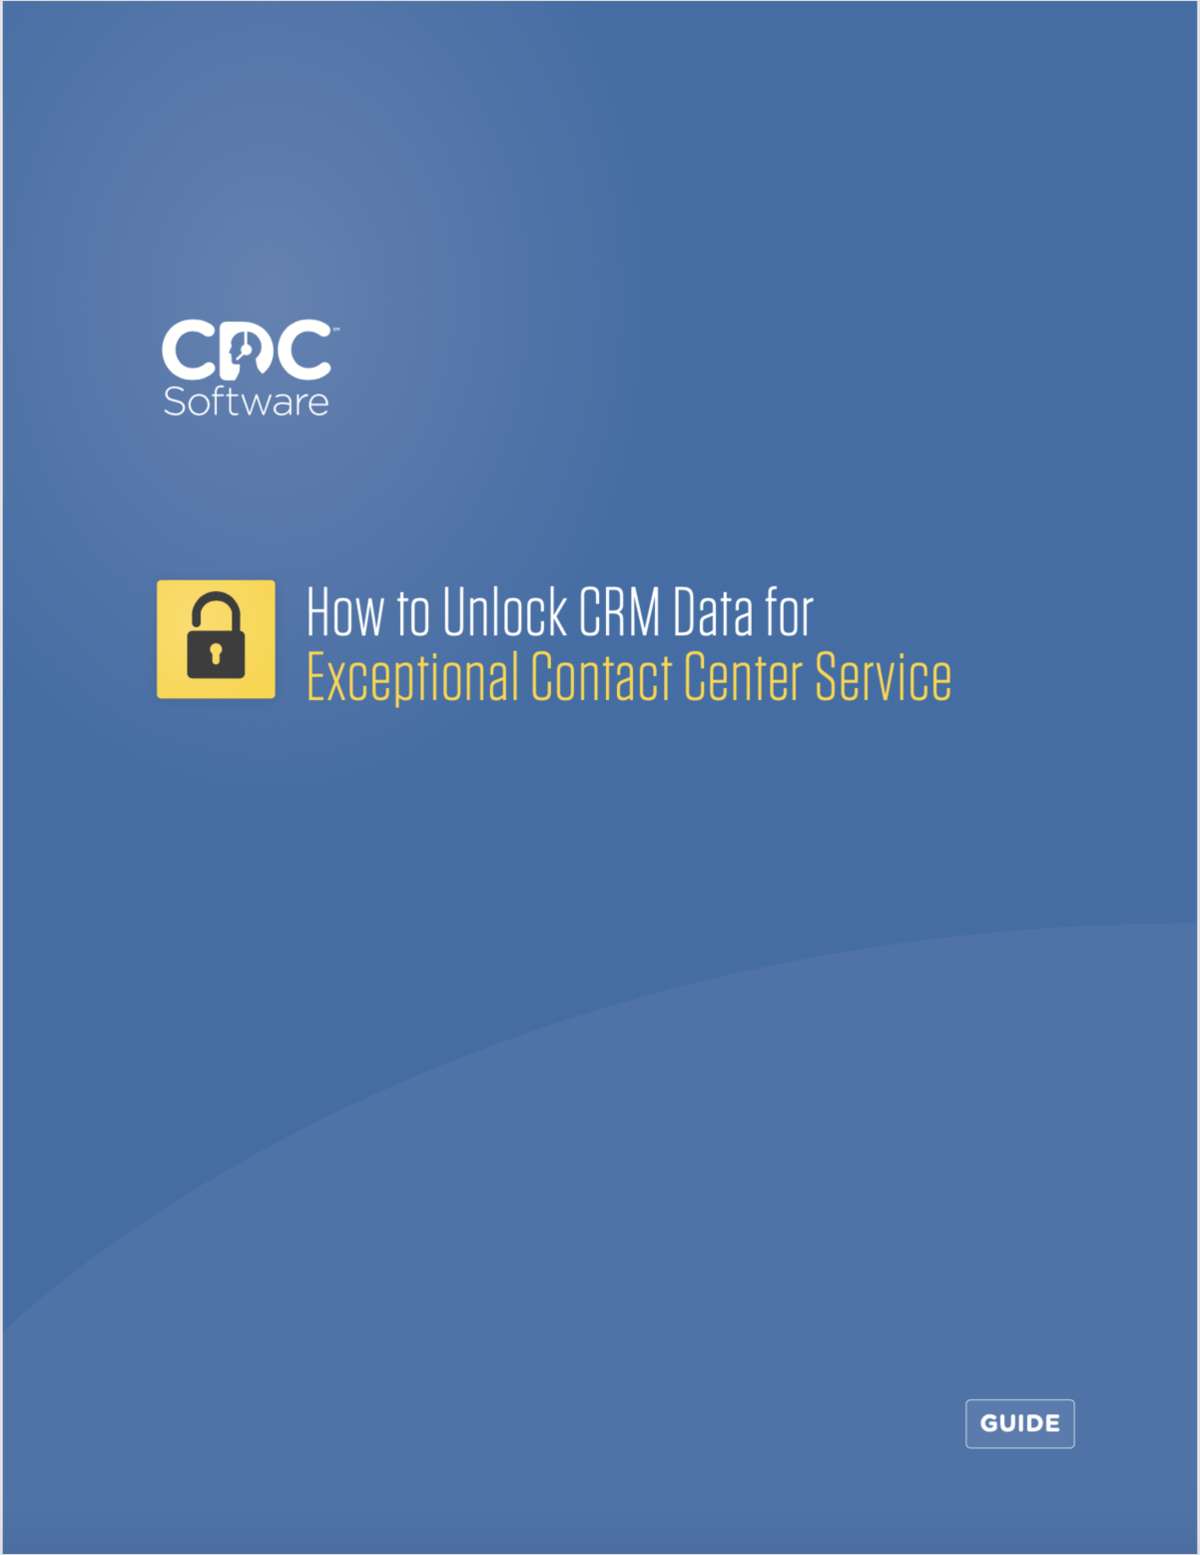 How to Unlock CRM Data for Exceptional Contact Center Service